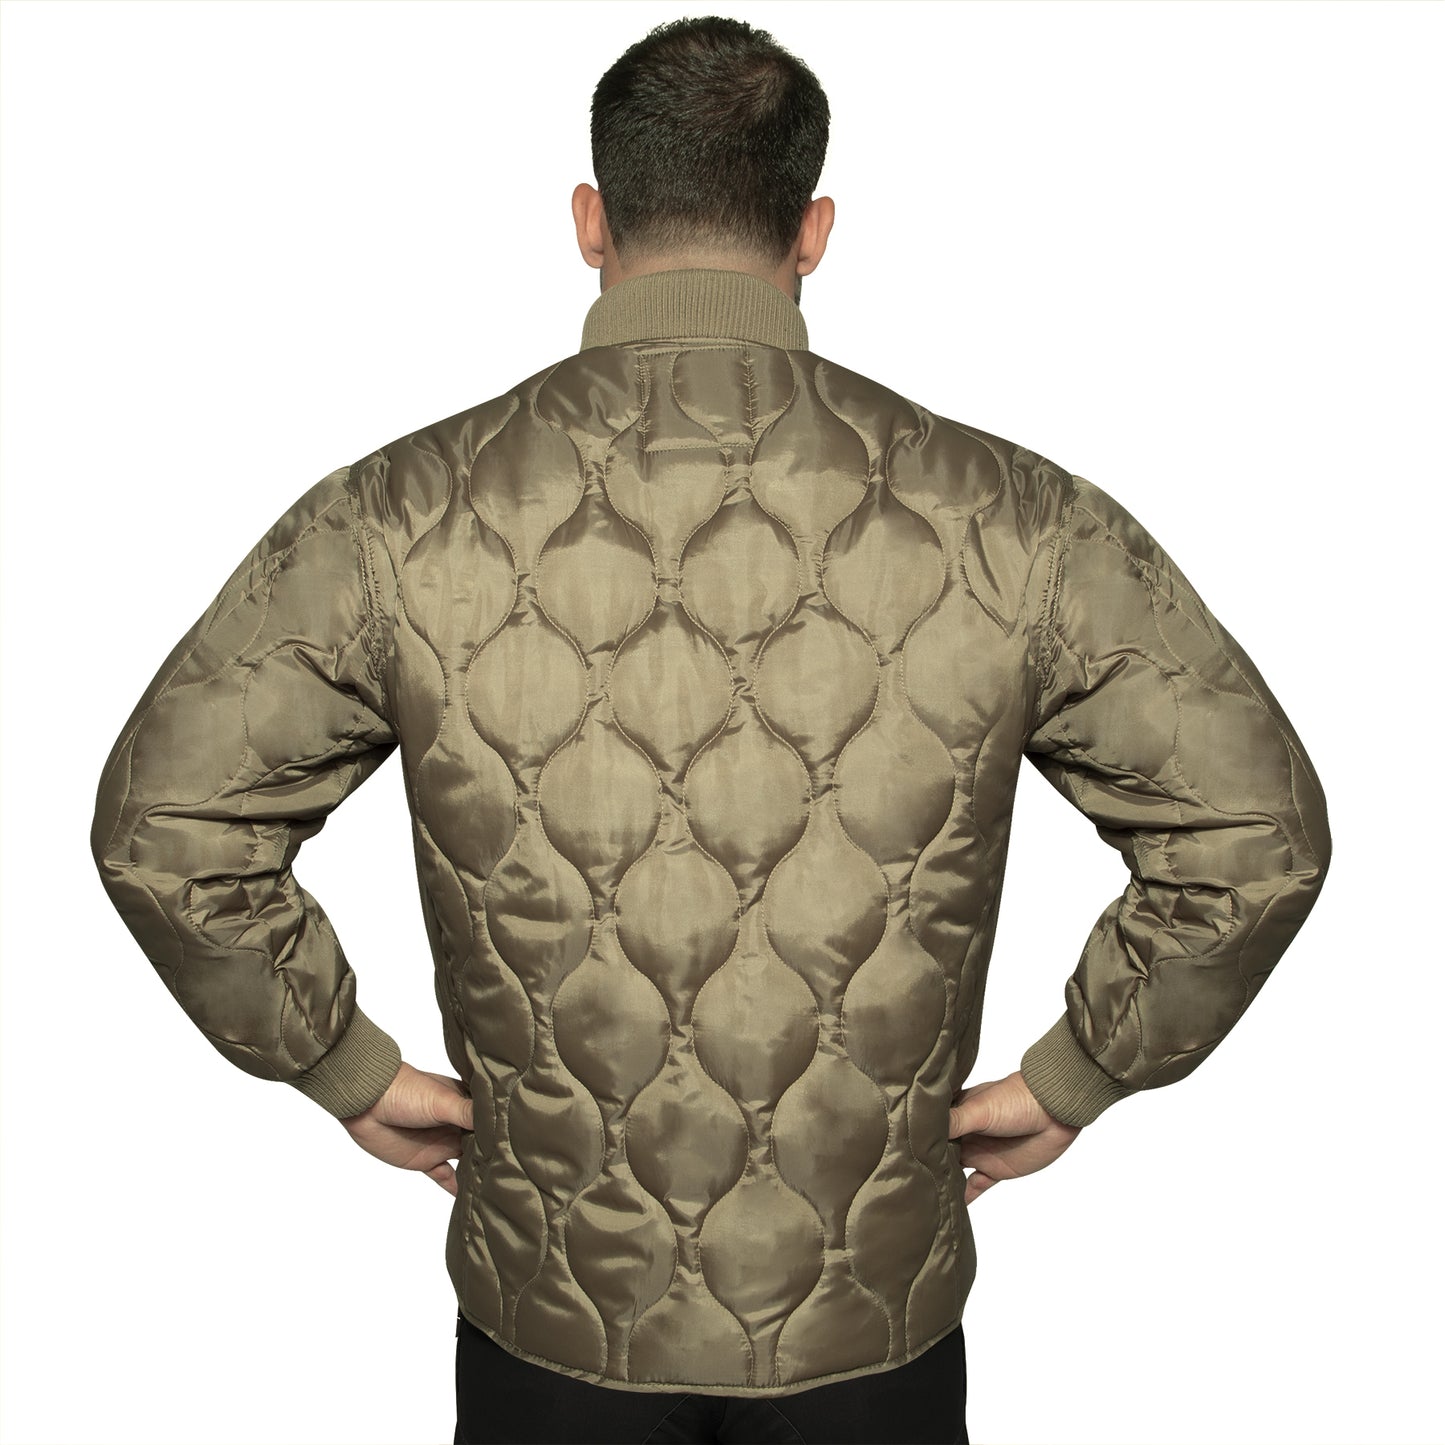 Men's Style Quilted Woobie Fashion Jacket